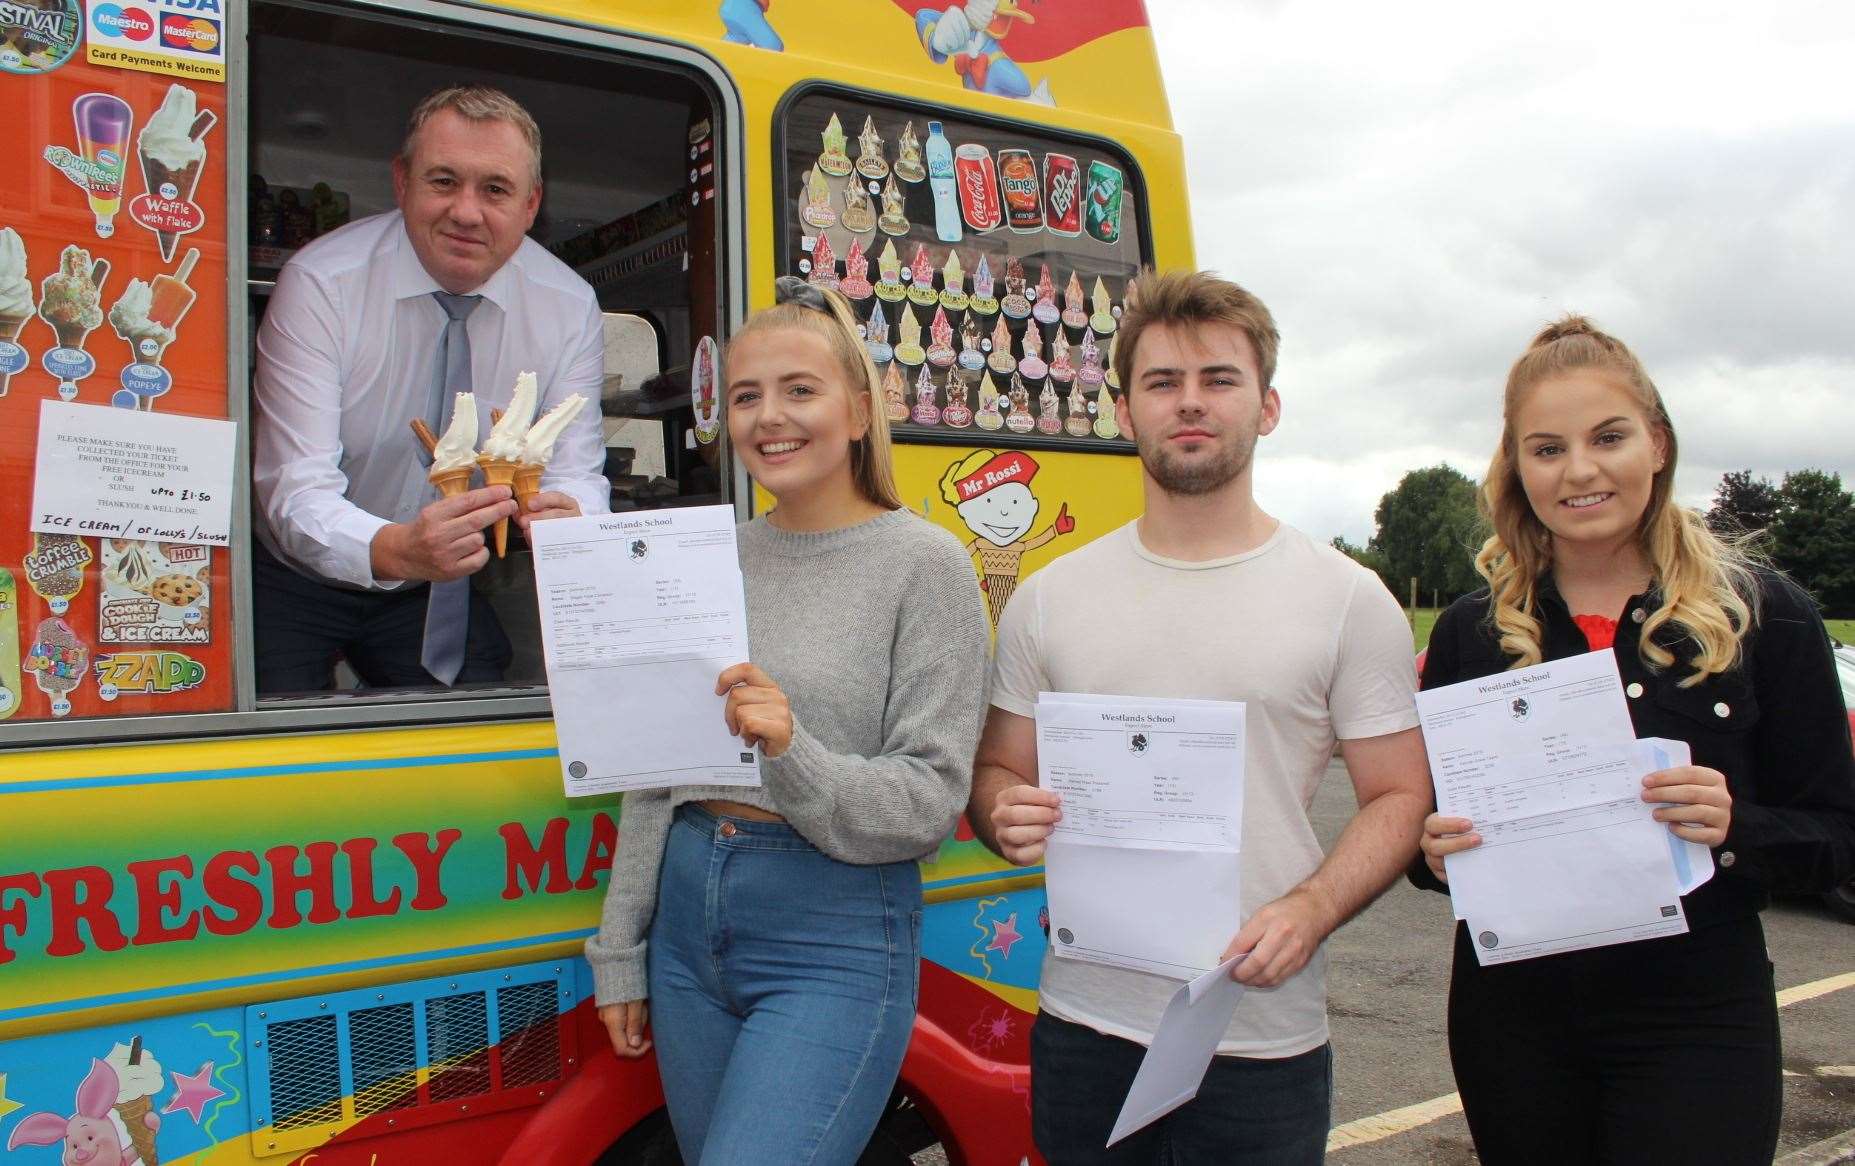 Head teacher Simon Cox hands out free ice creams at Westlands School, Sittingbourne, to pupils Megan Colverson, left, Harvey Pressnell and Hannah Taylor